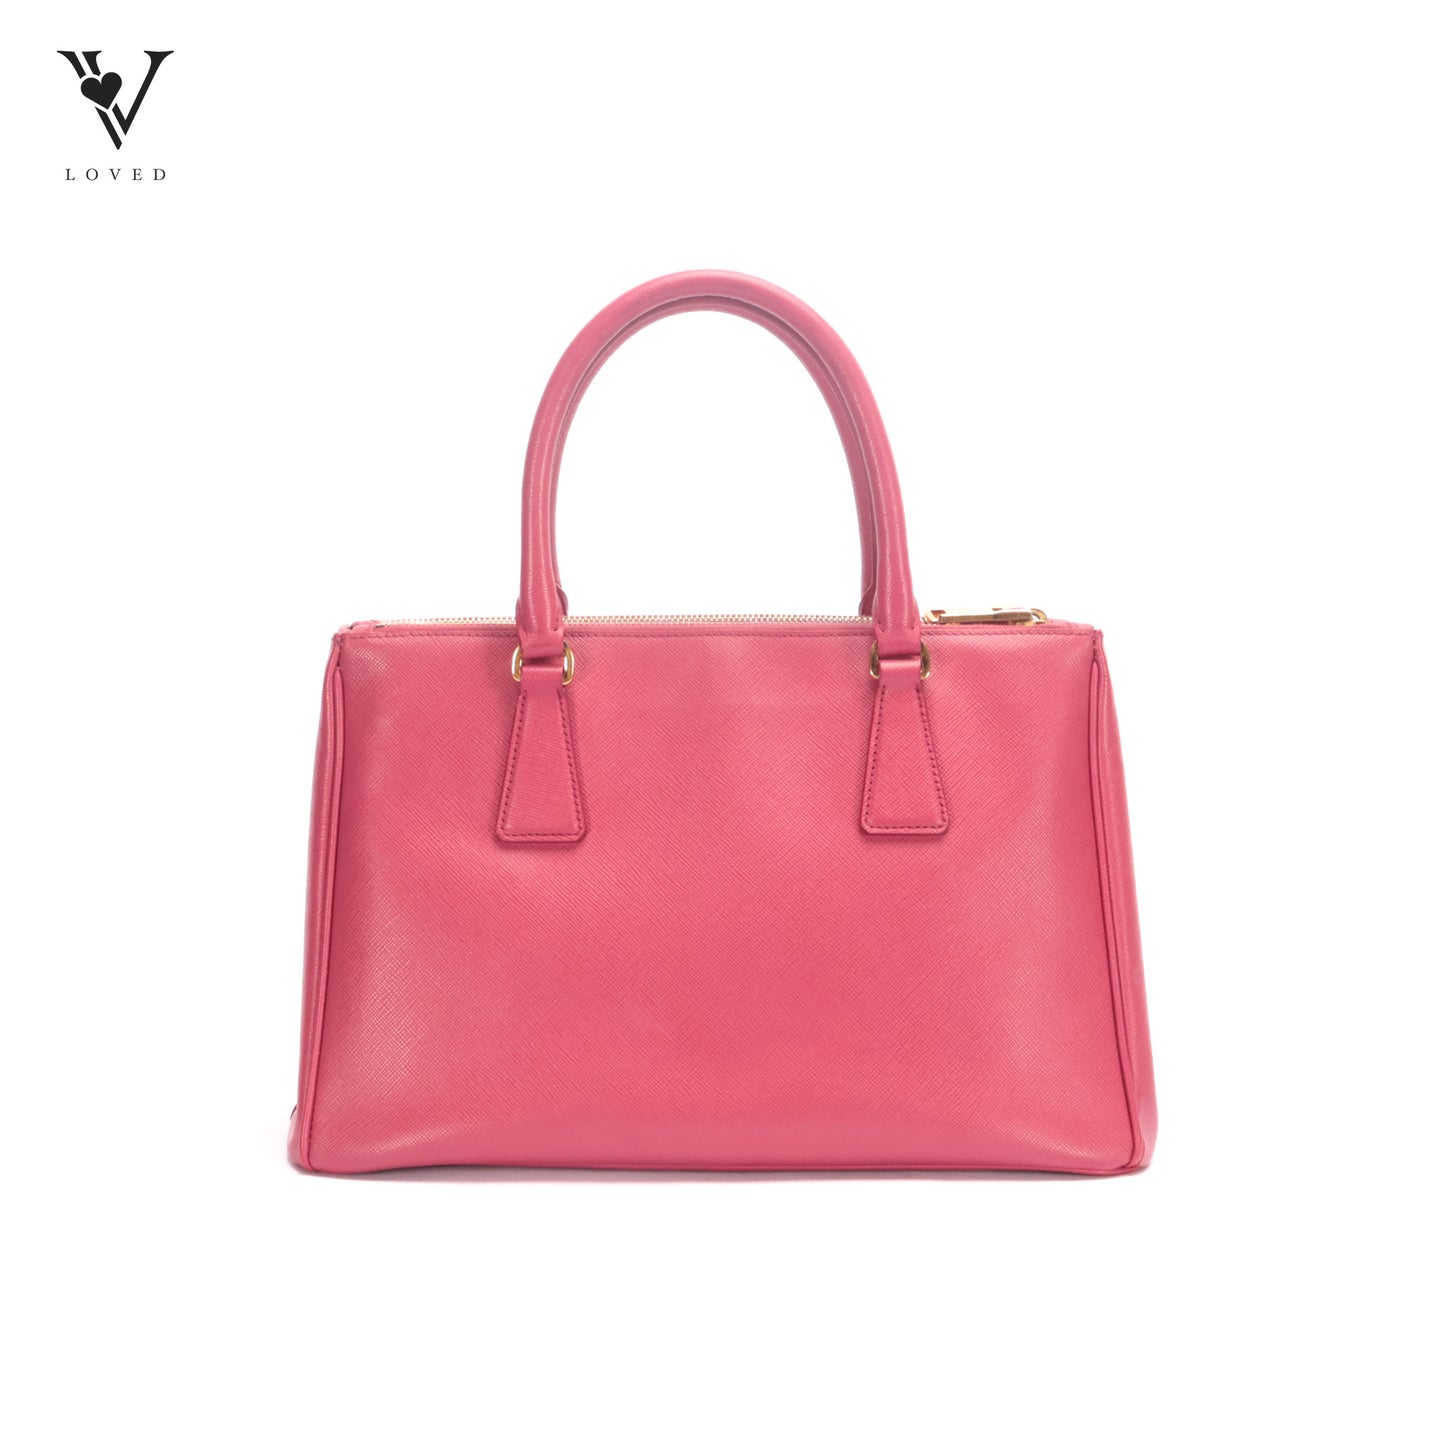 Galleria Double Zipped Two-way Bag in Pink Saffiano Leather